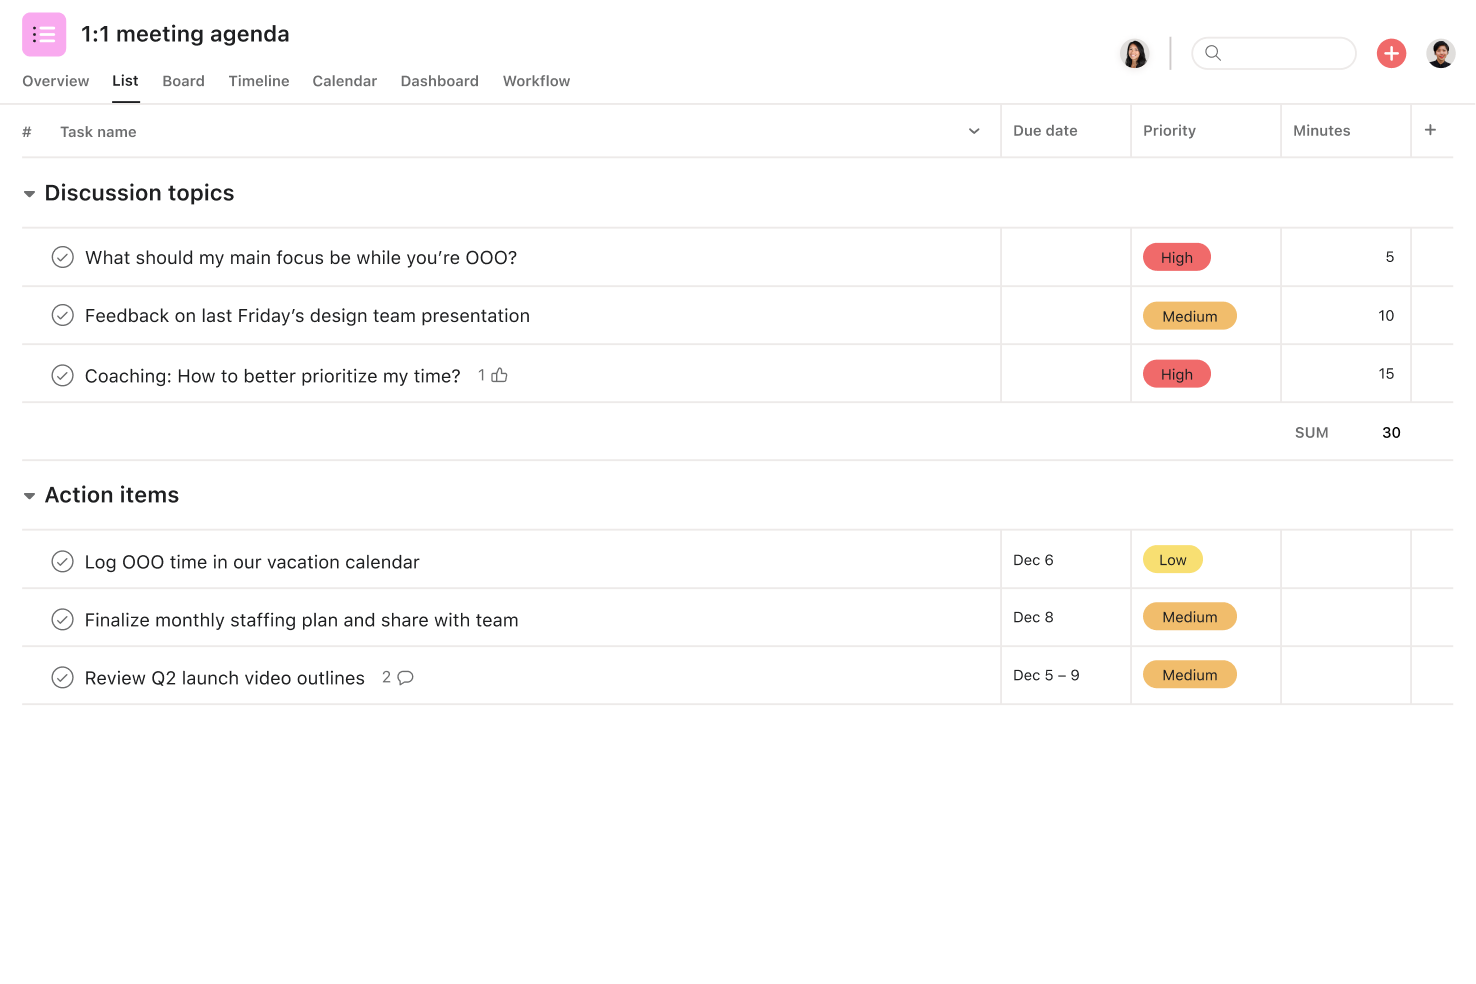 [Product ui] 1:1 meeting agenda template with discussion topics, action items, and topic priority (list view)